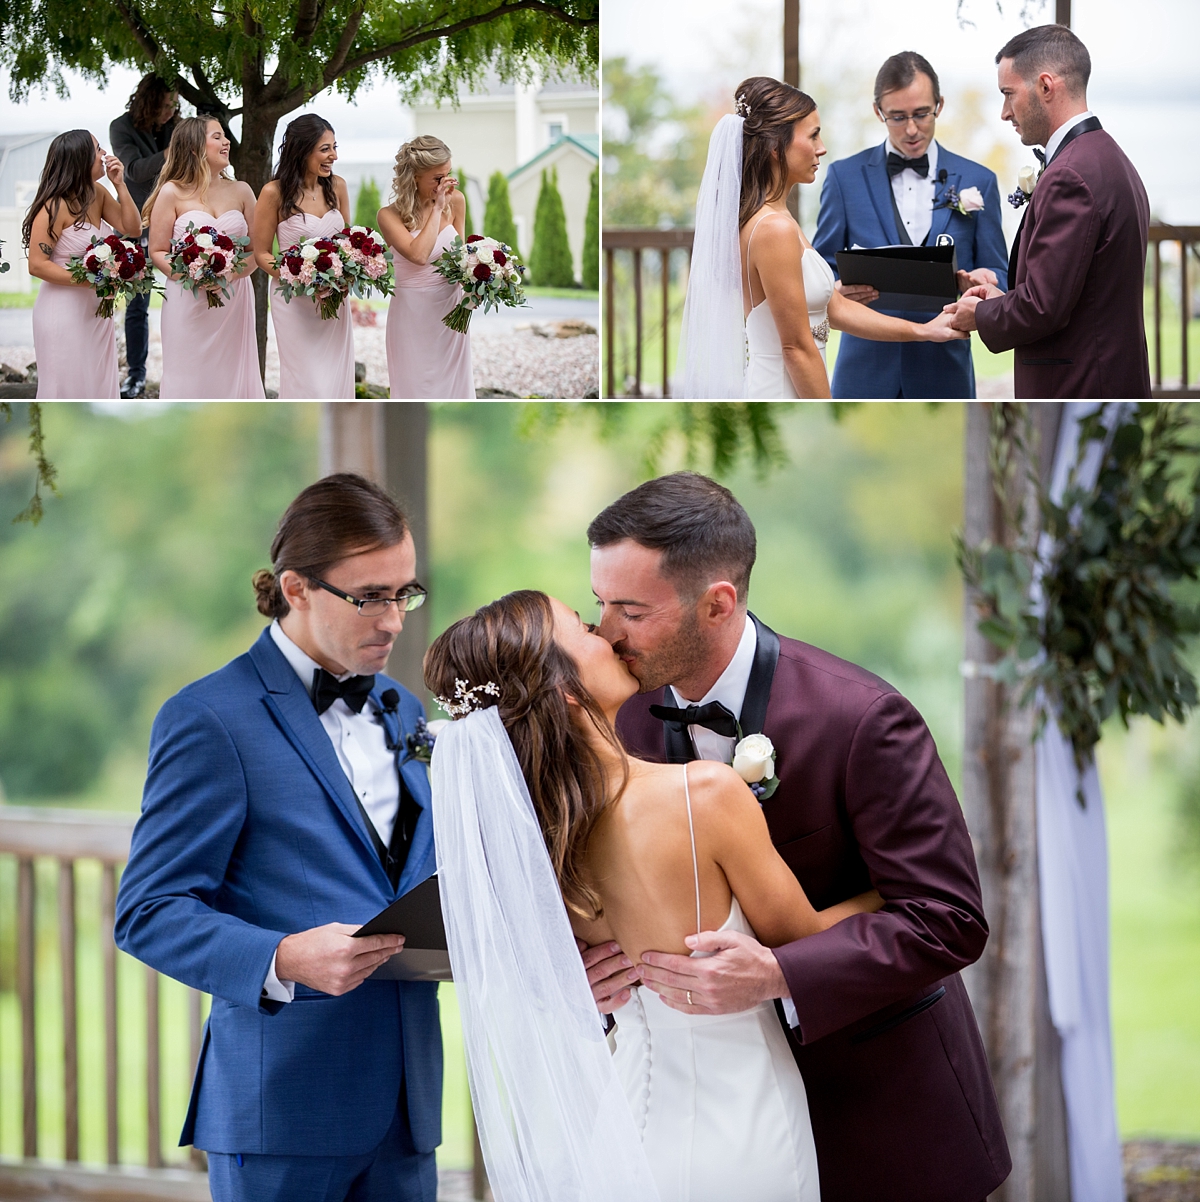 chantelle marie lakehouse and celebration venue, sarah heppell photography, bride and groom kiss, ceremony kiss, bridesmaids crying 